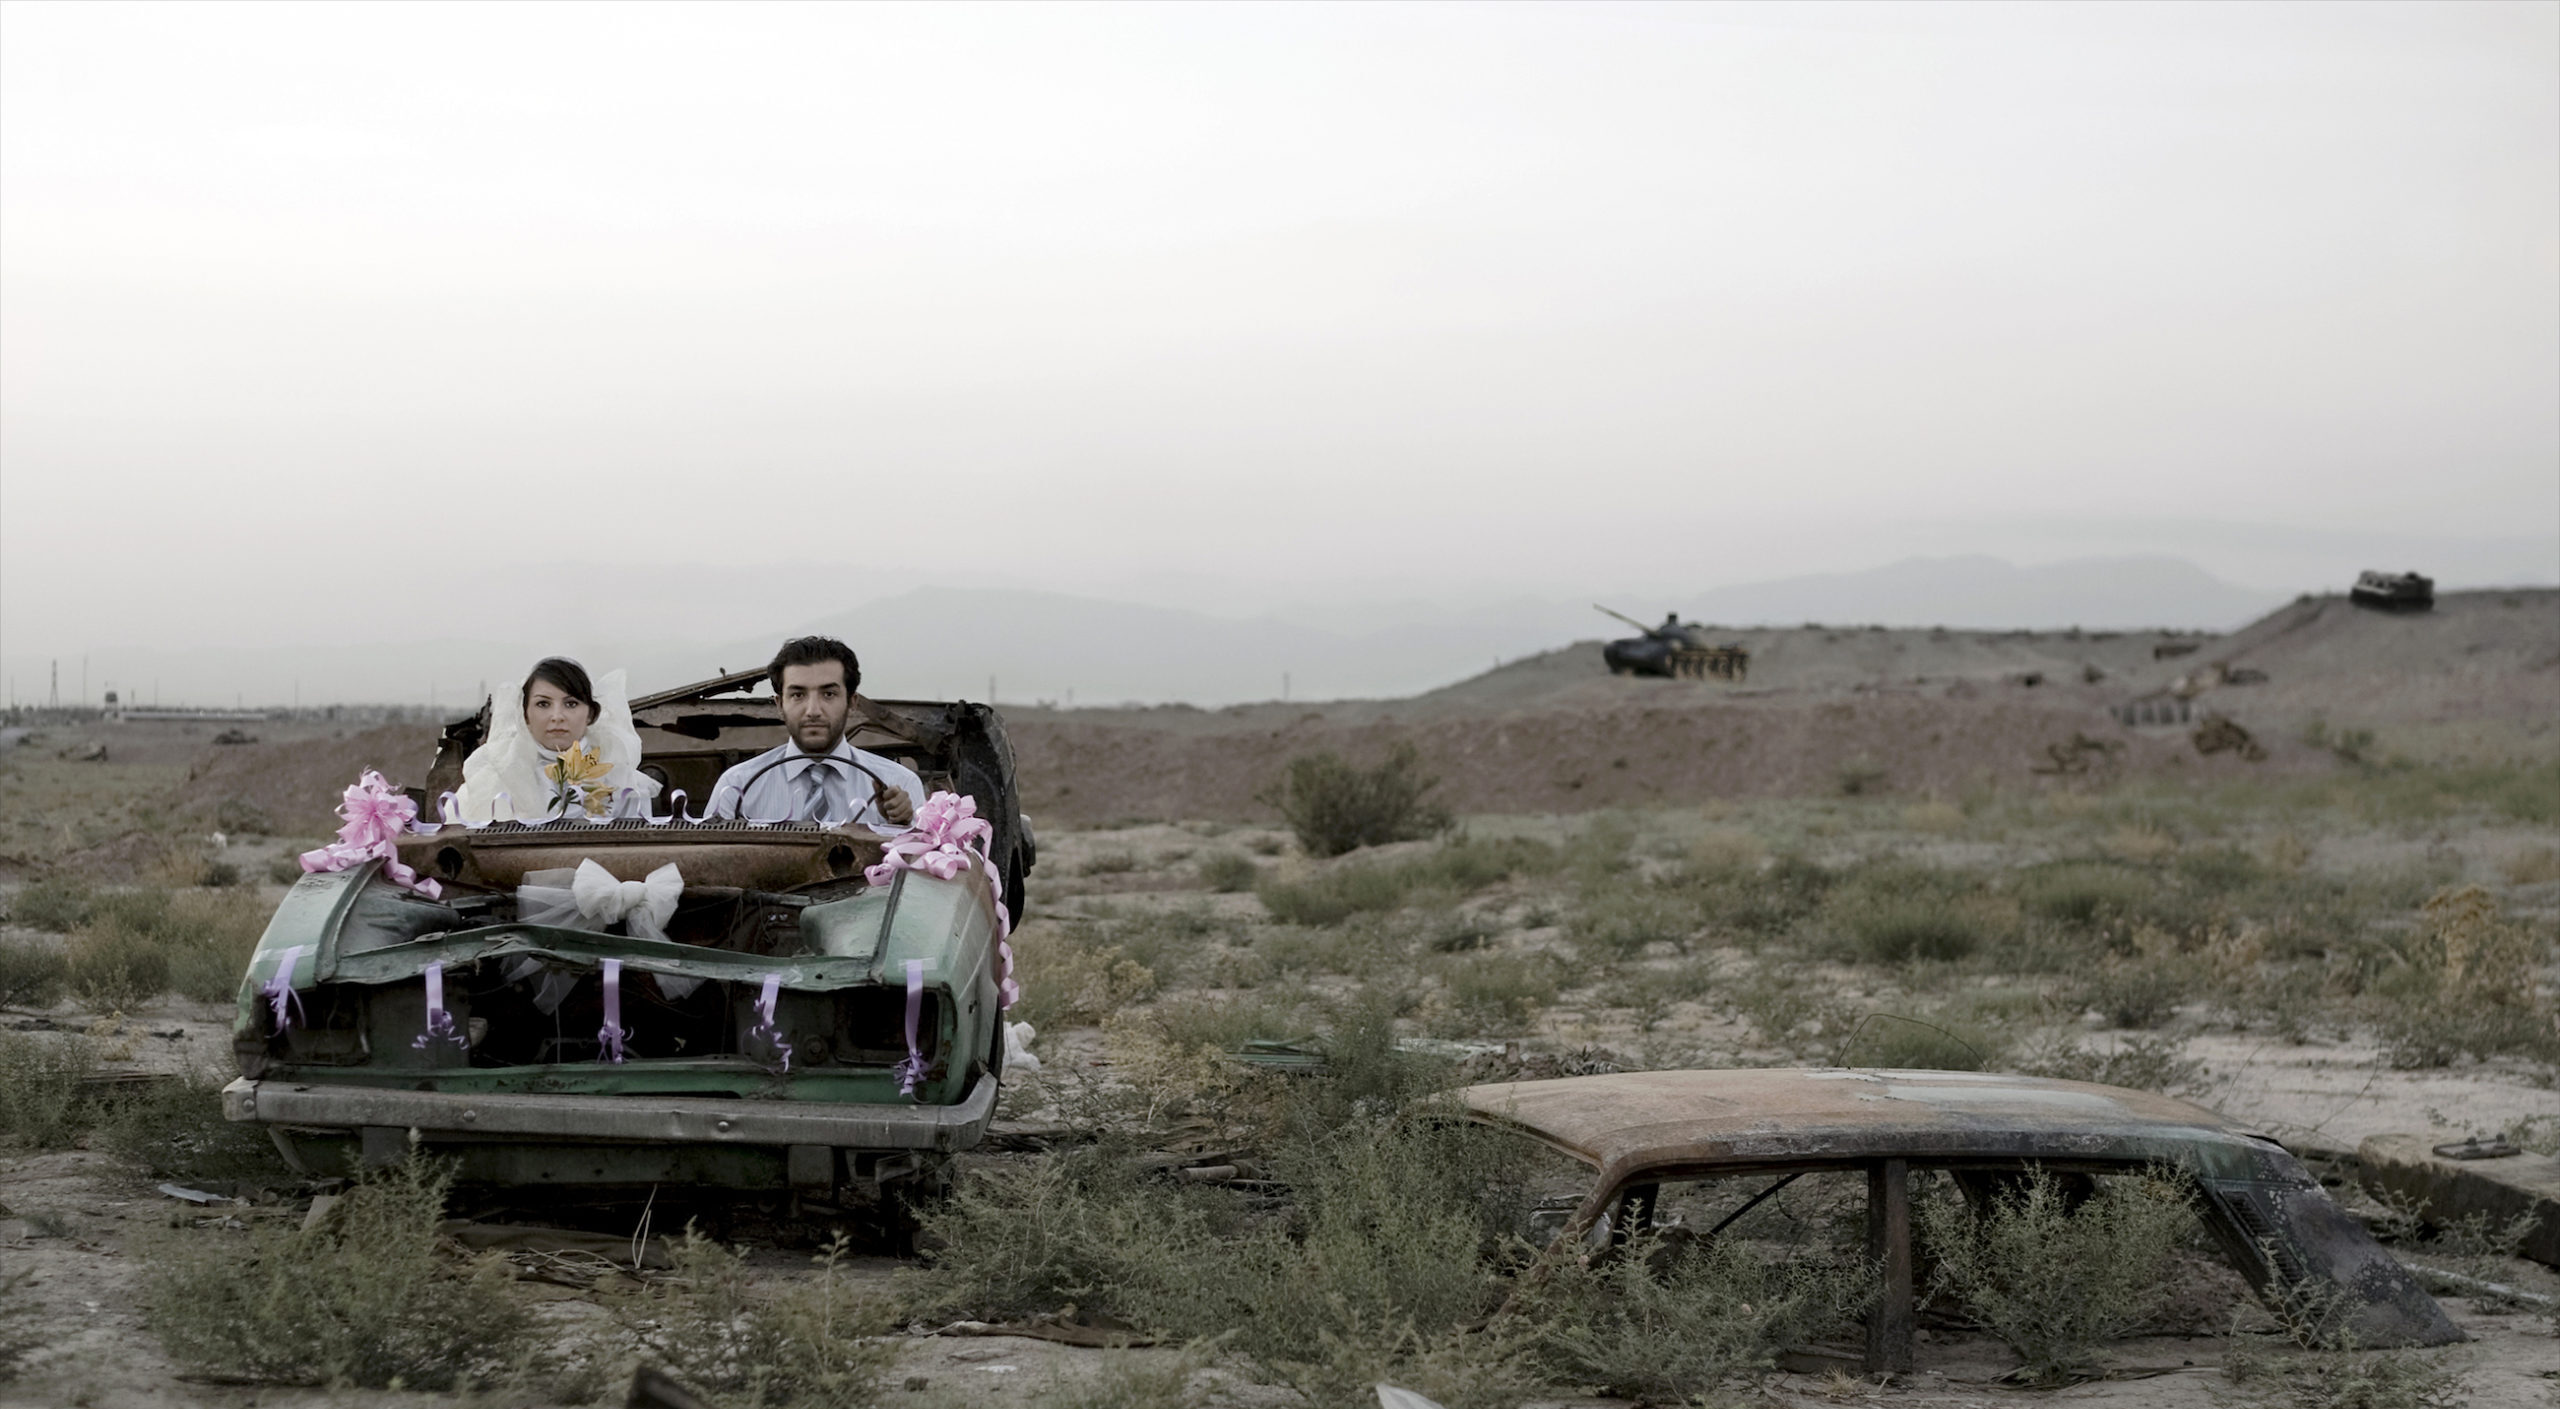 A couple sitting in a burned-out car in wedding finery, they look directly at the camera with neutral or stricken expressions.